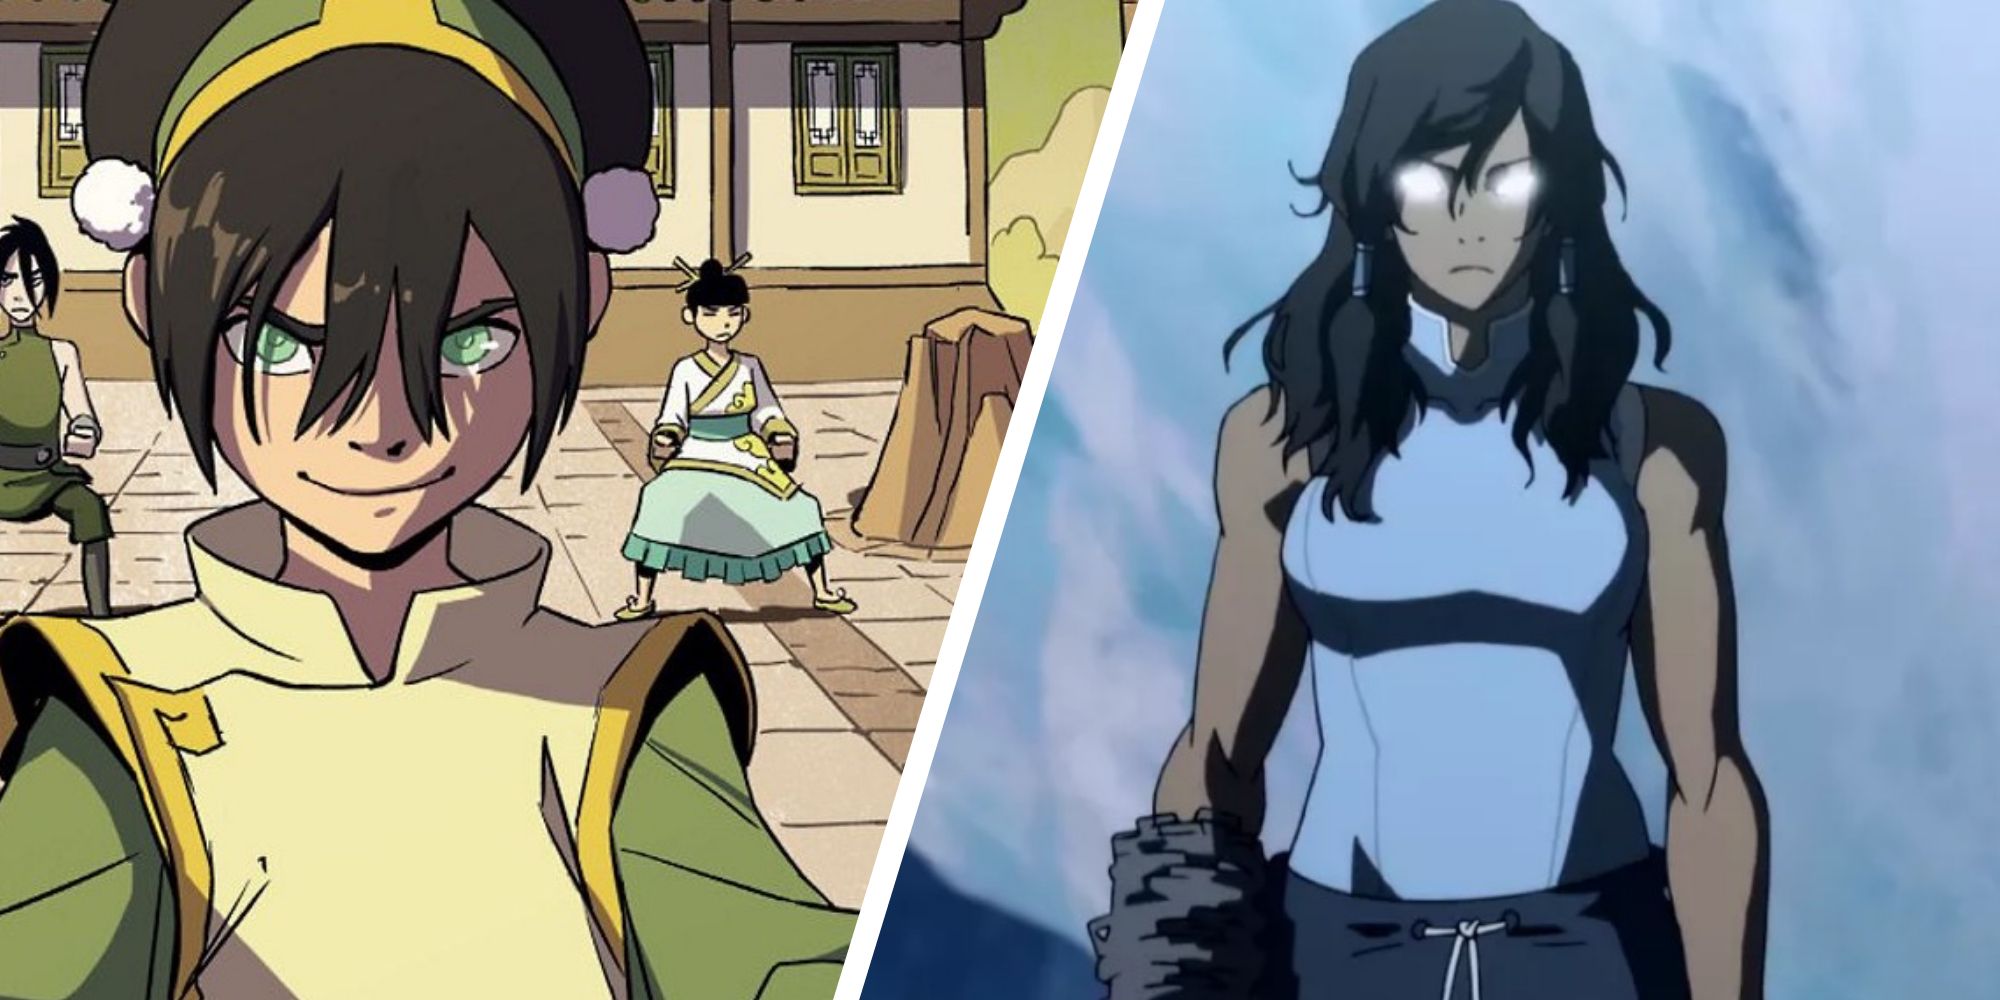 will there be a new avatar series after korra